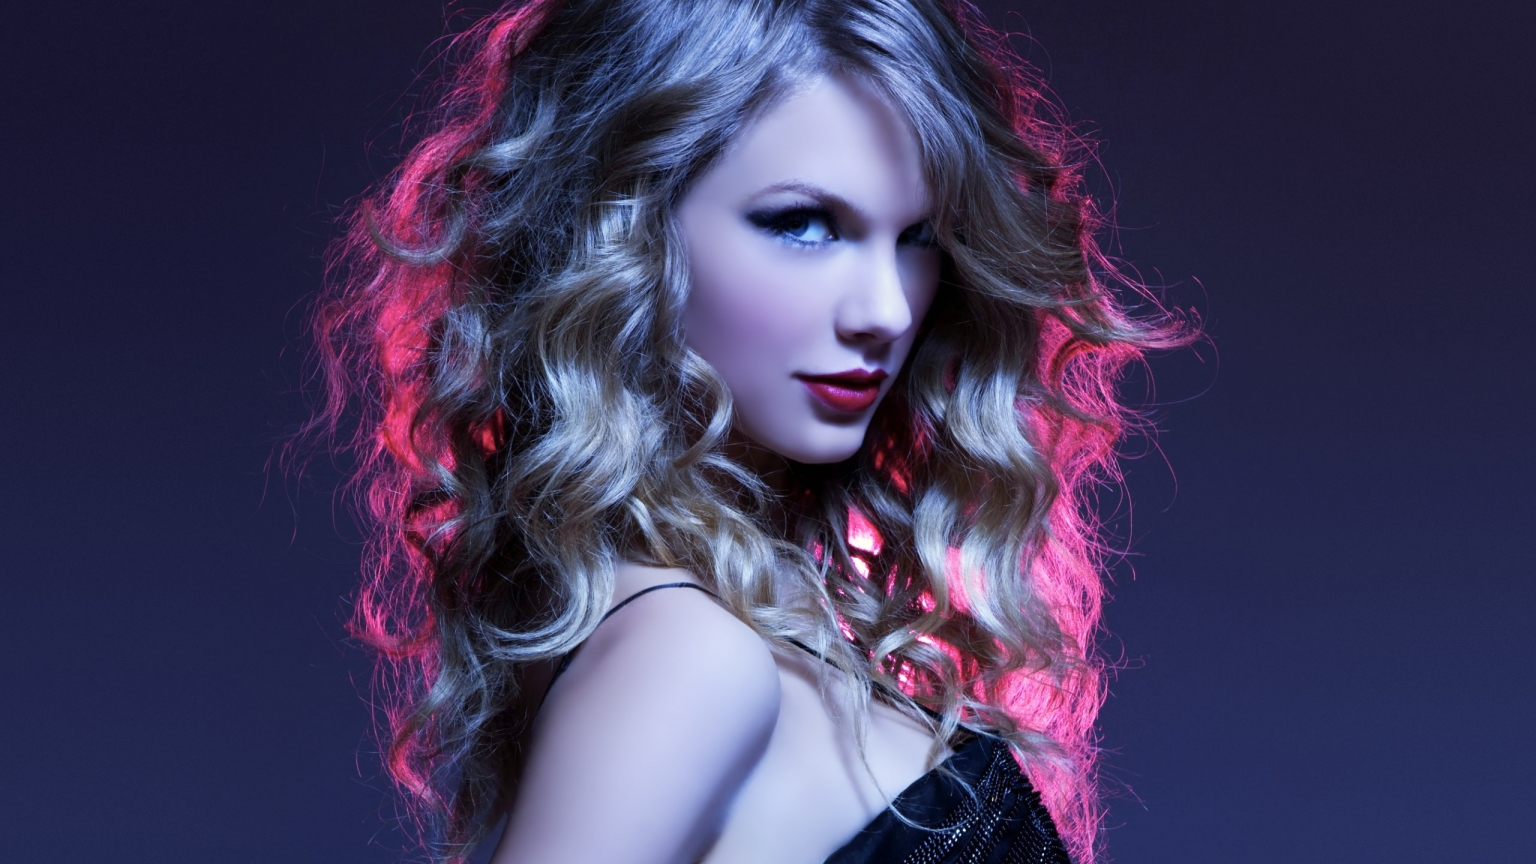 The Amazing Taylor Swift for 1536 x 864 HDTV resolution